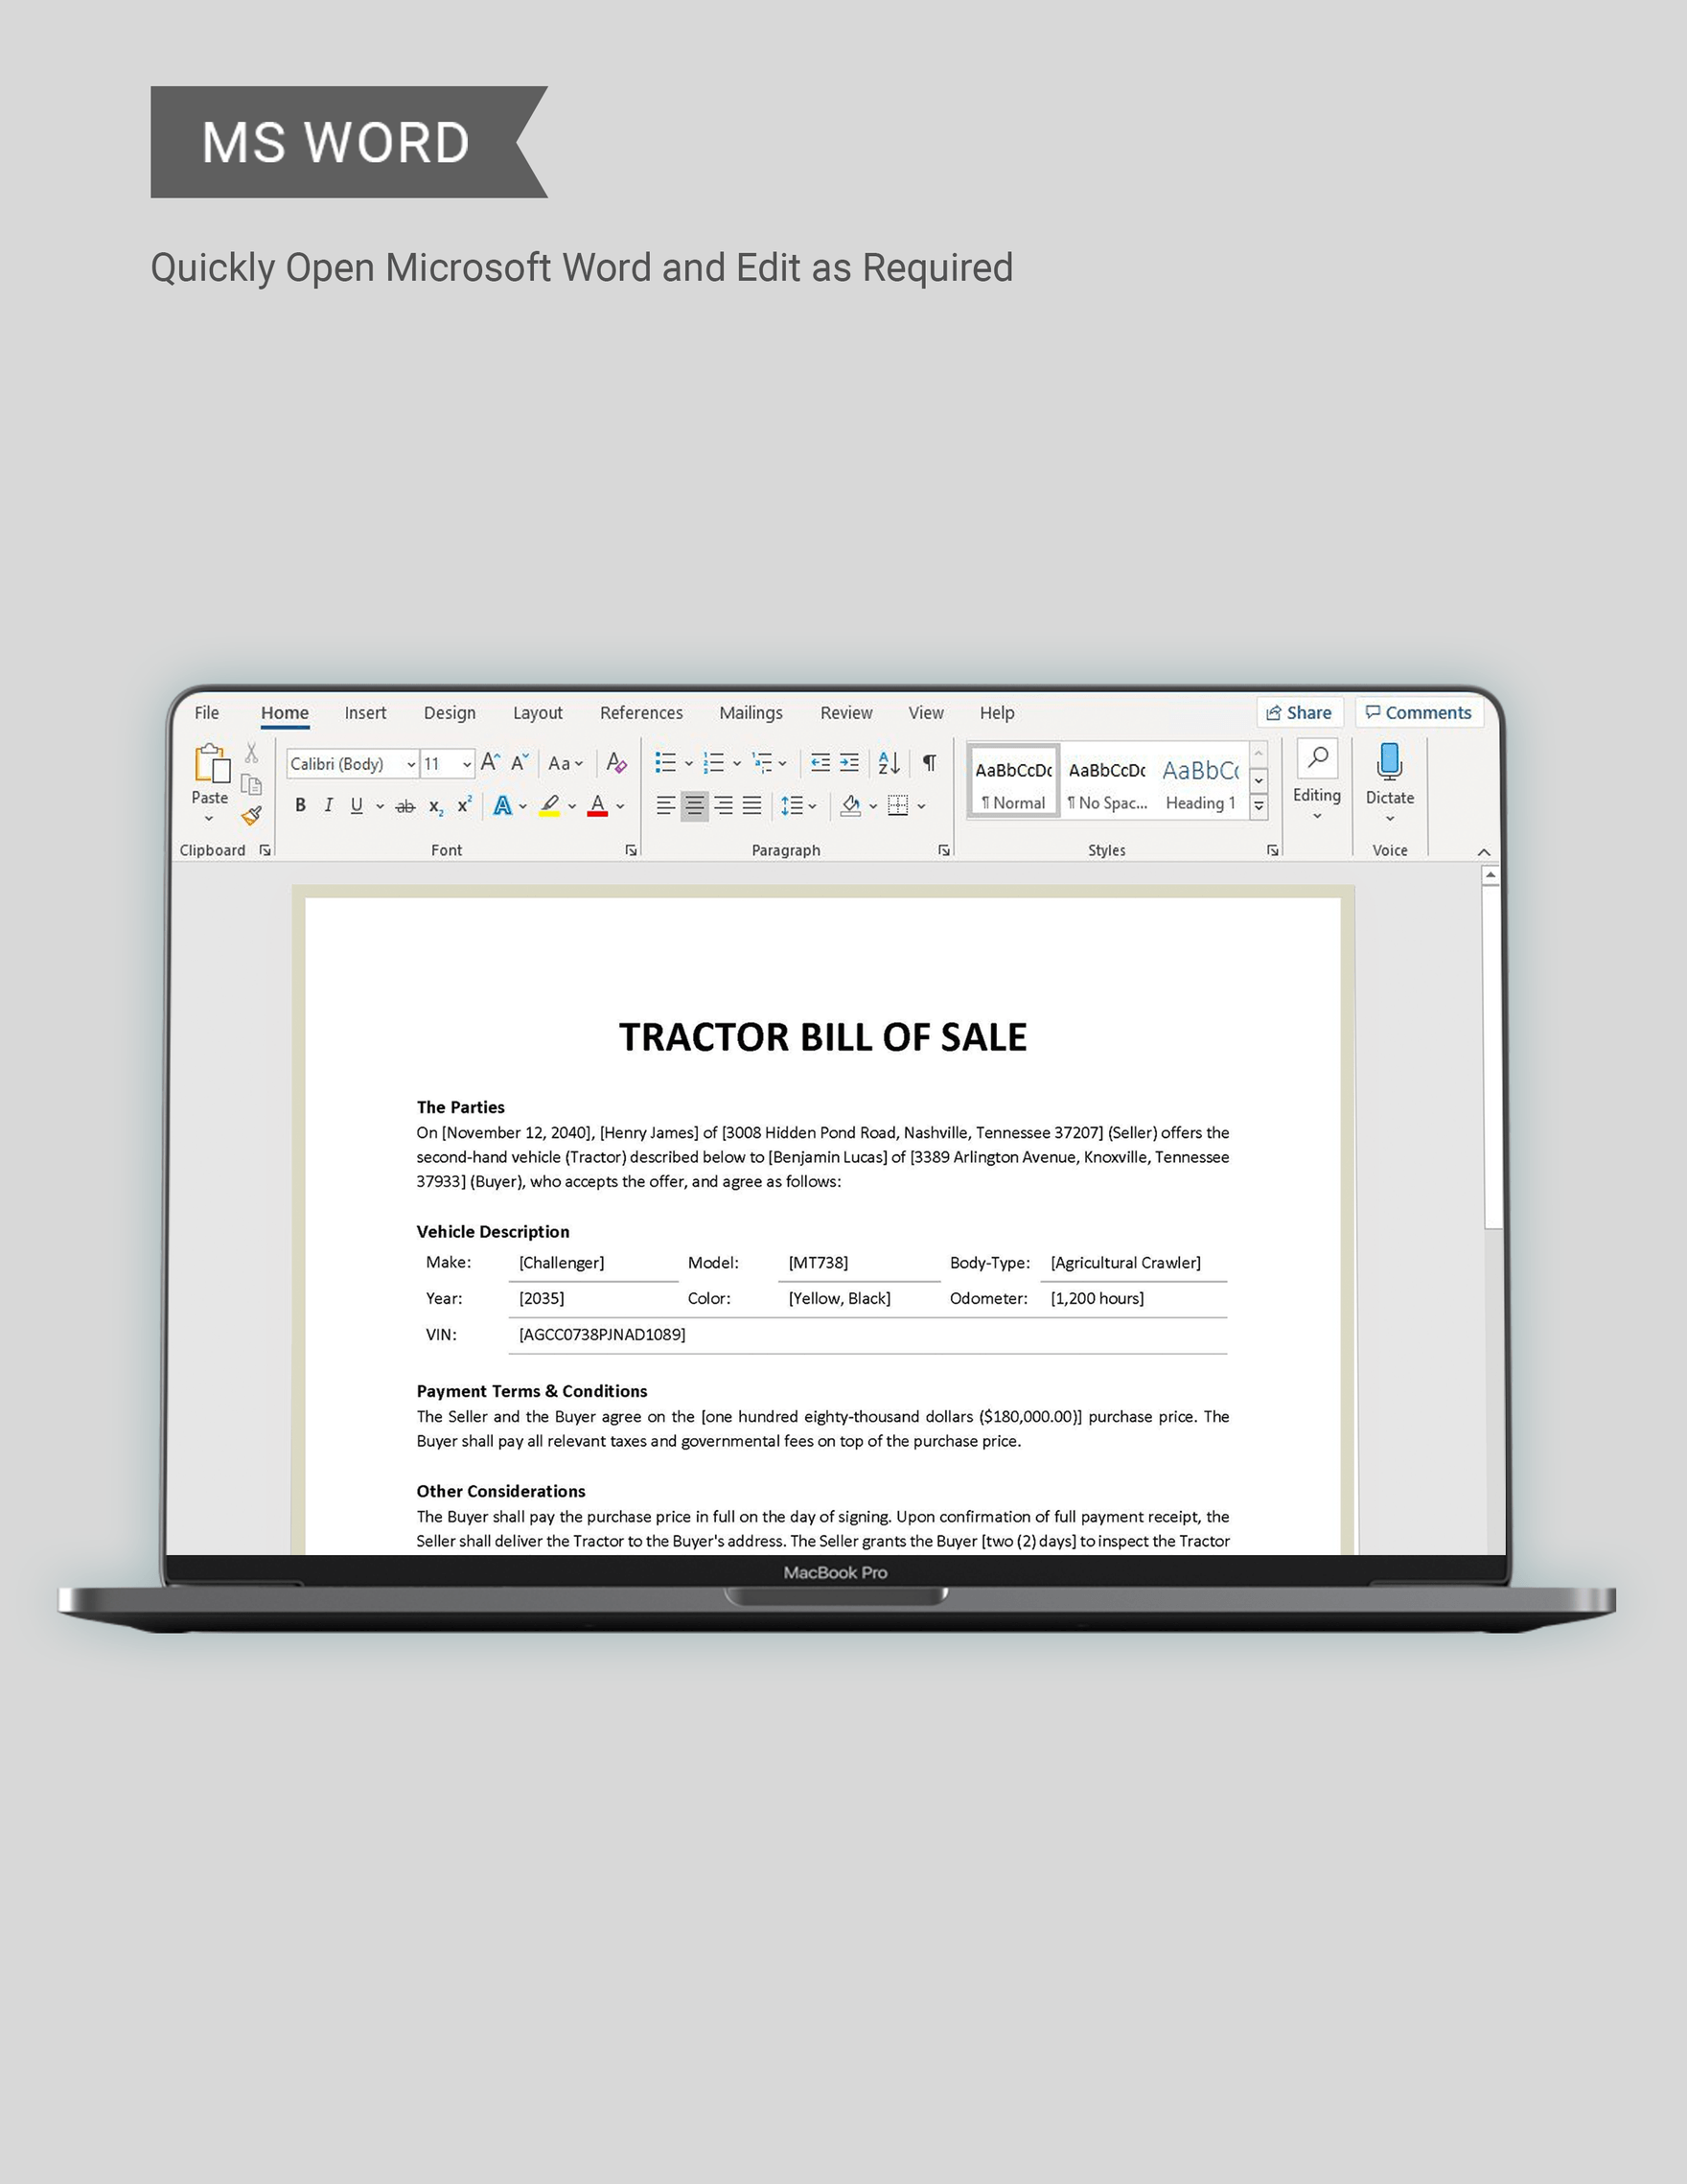 Tractor Bill of Sale Template